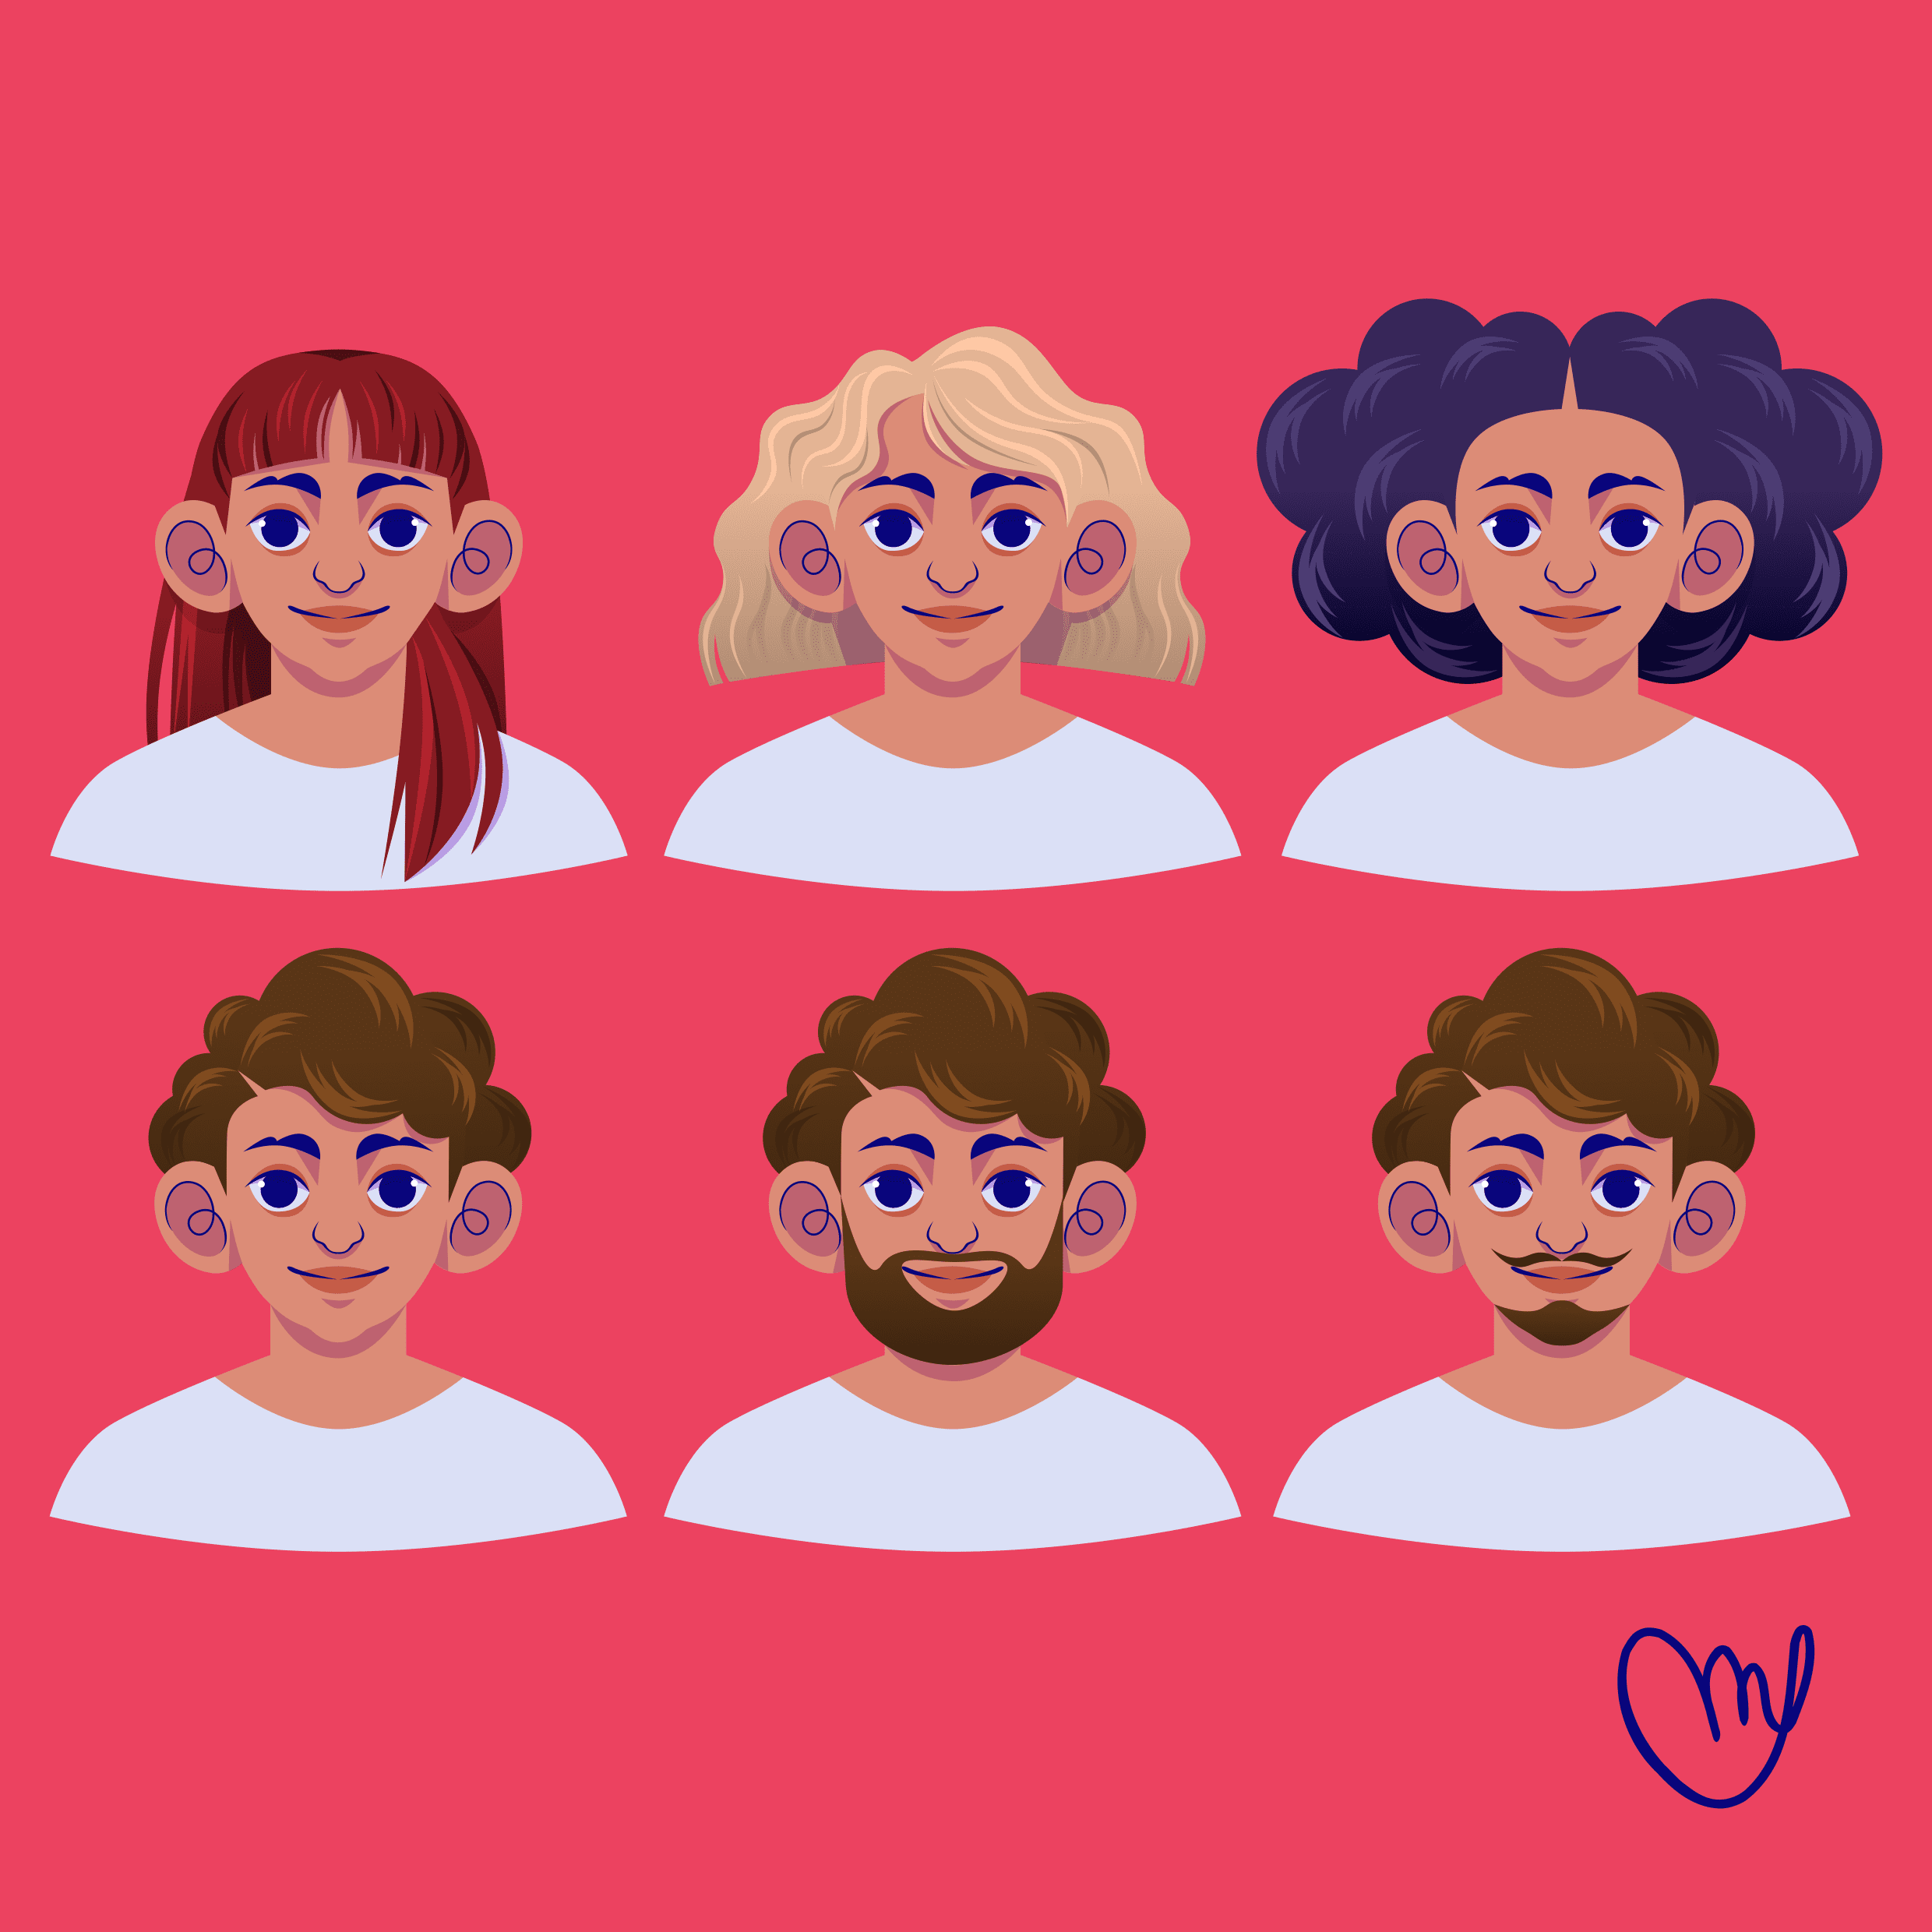 Vector portraits on a red background